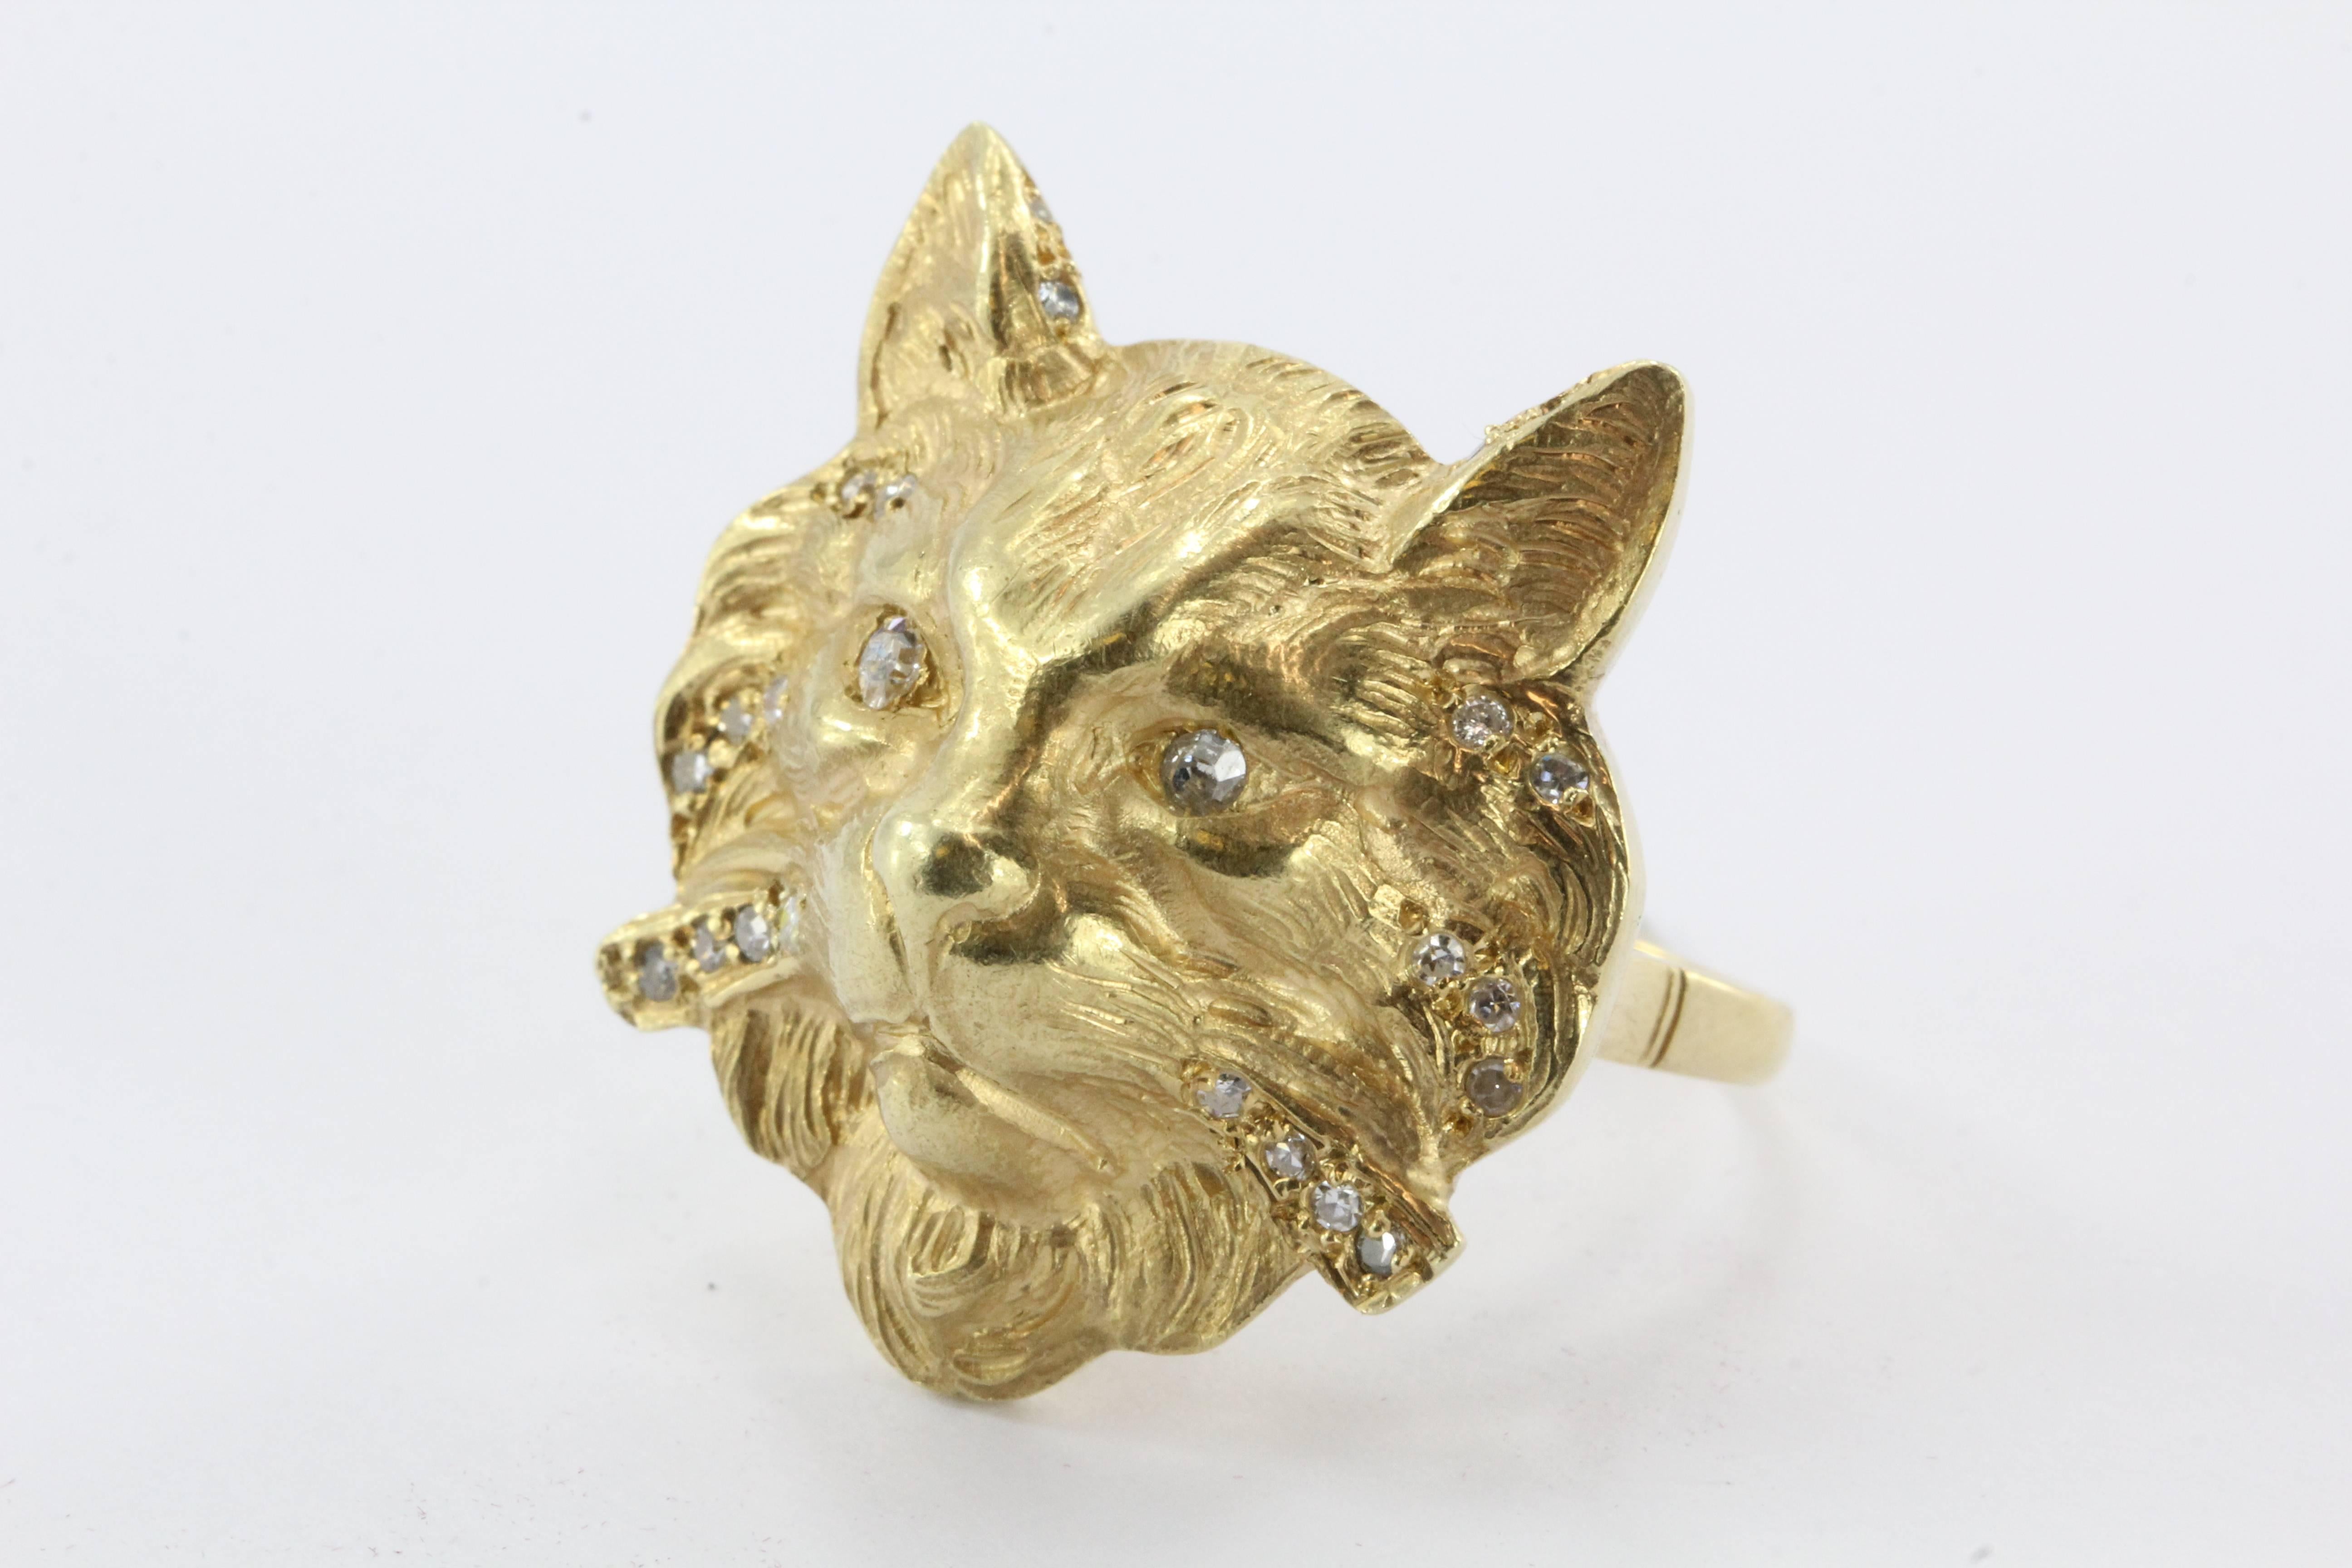 18K Gold & Diamond Large Chunky Cat Face Ring. The ring is in excellent estate condition and ready to wear. The piece is made of 18K yellow gold and set with approximately .25 carats of single cut diamonds highlighting the eyes and whiskers. The cat